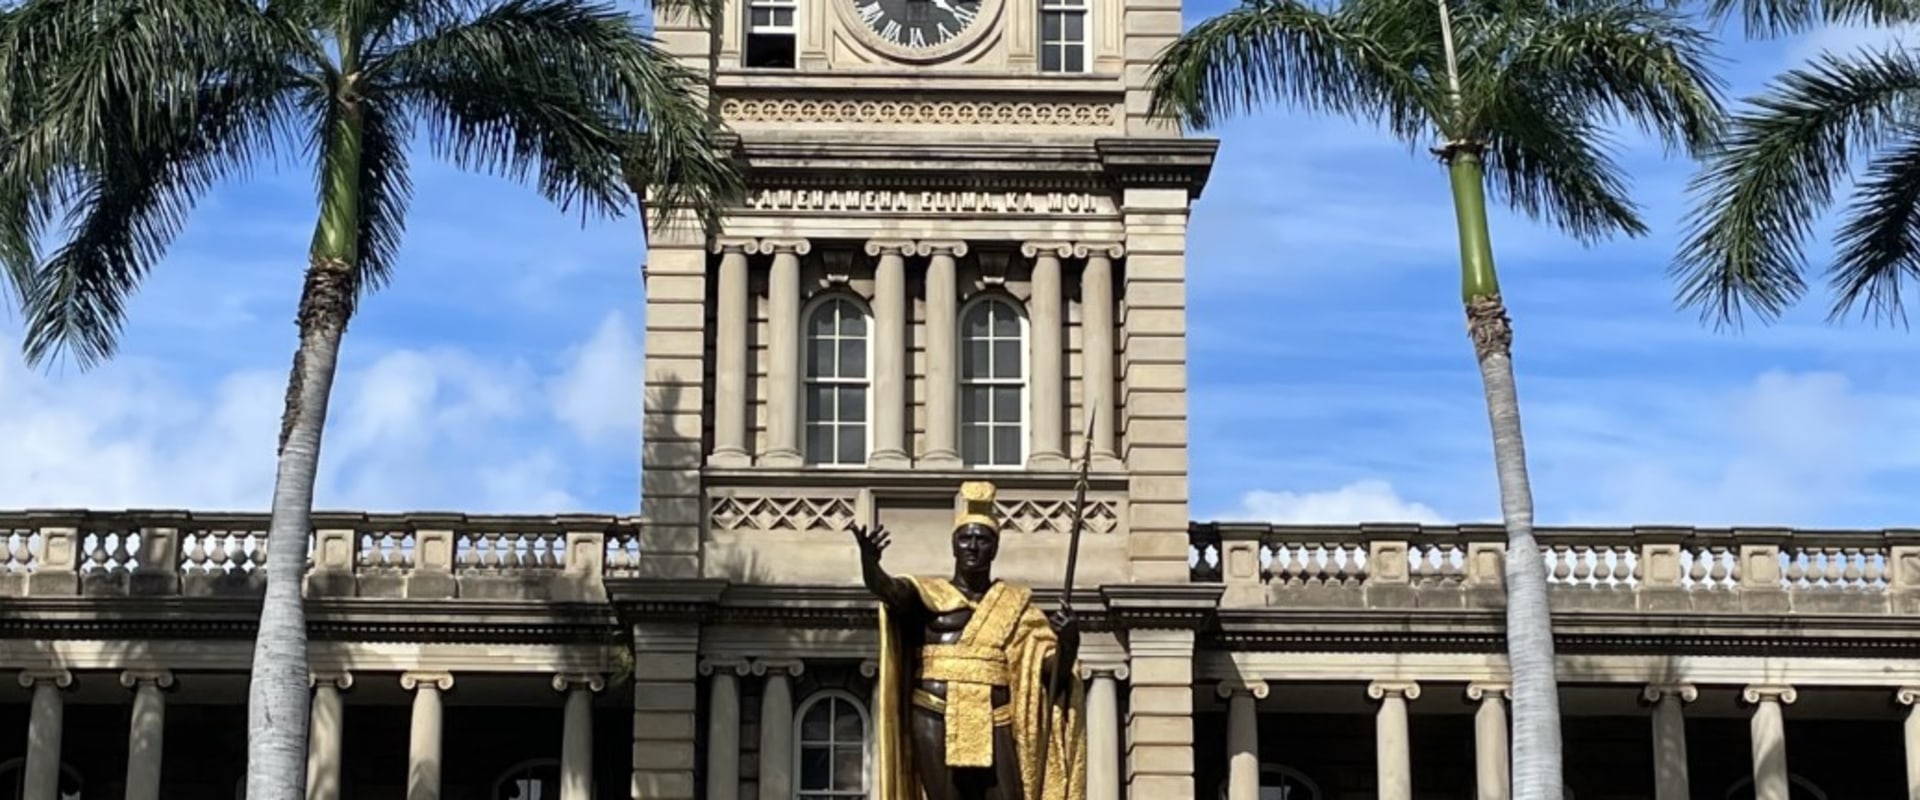 The Role of Religion in Hawaiian Government Institutions